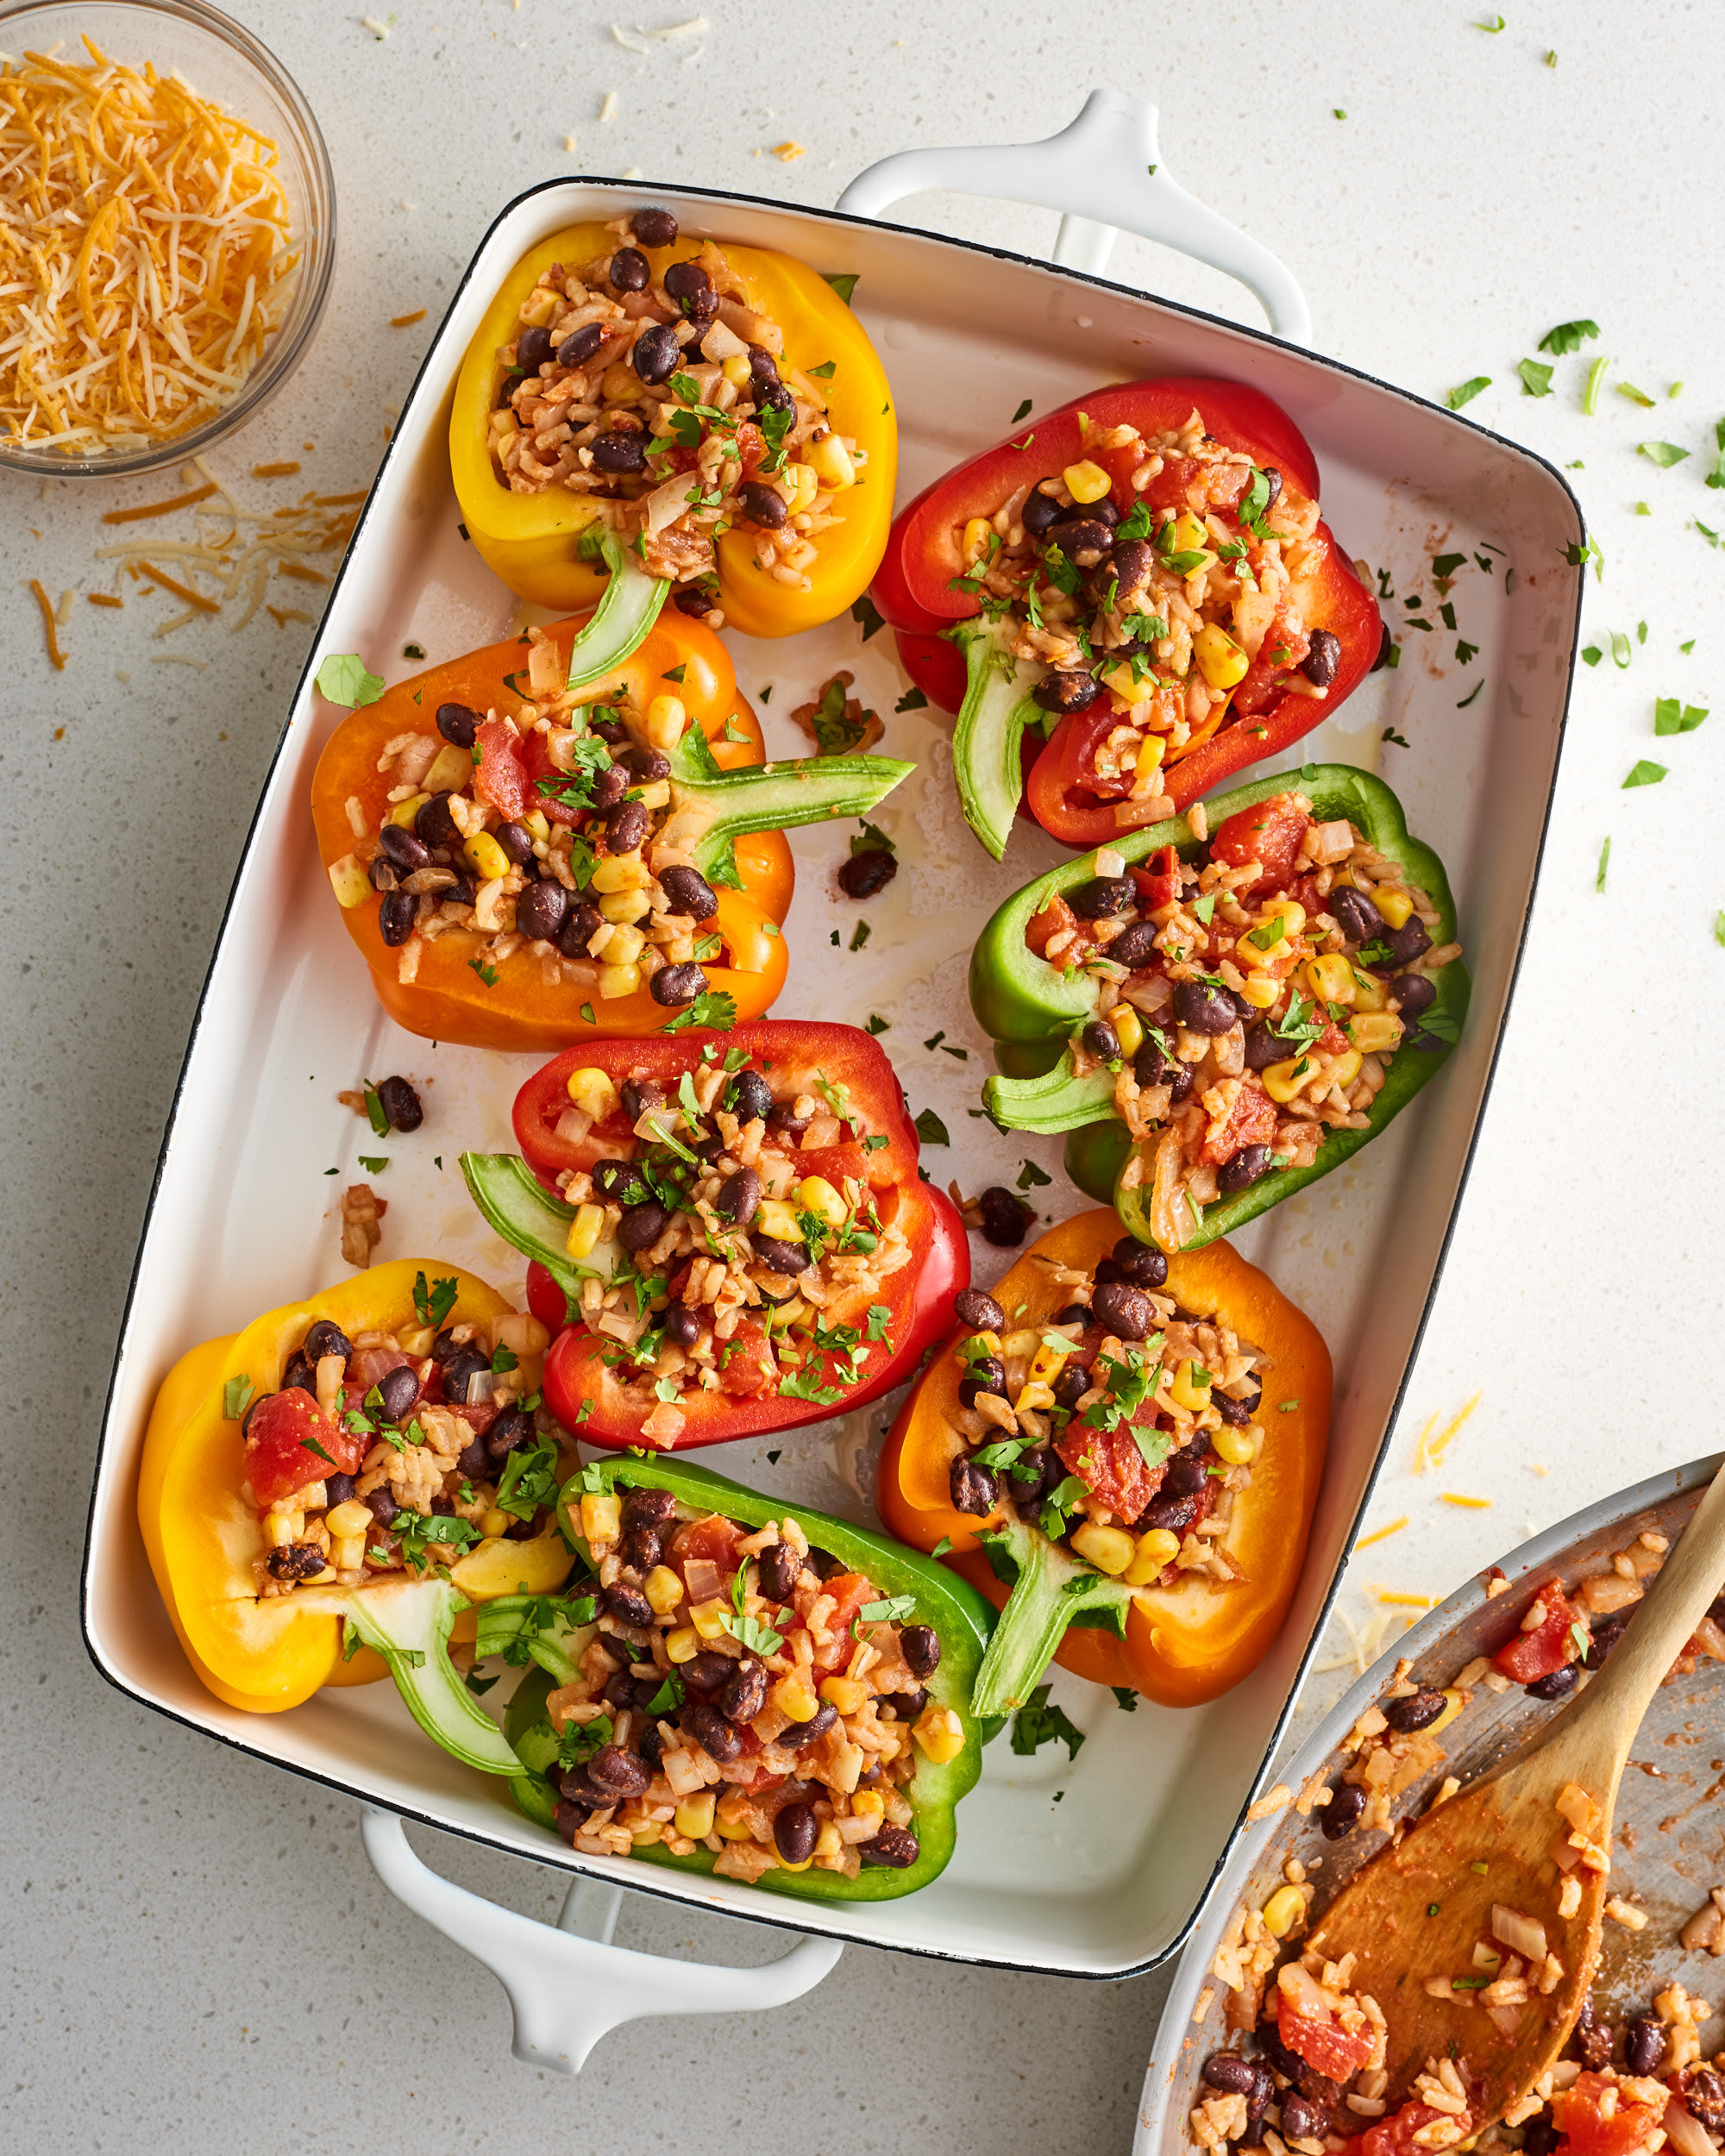 Vegetarian Stuffed Peppers Kitchn,What Is A Dogs Normal Temperature Range